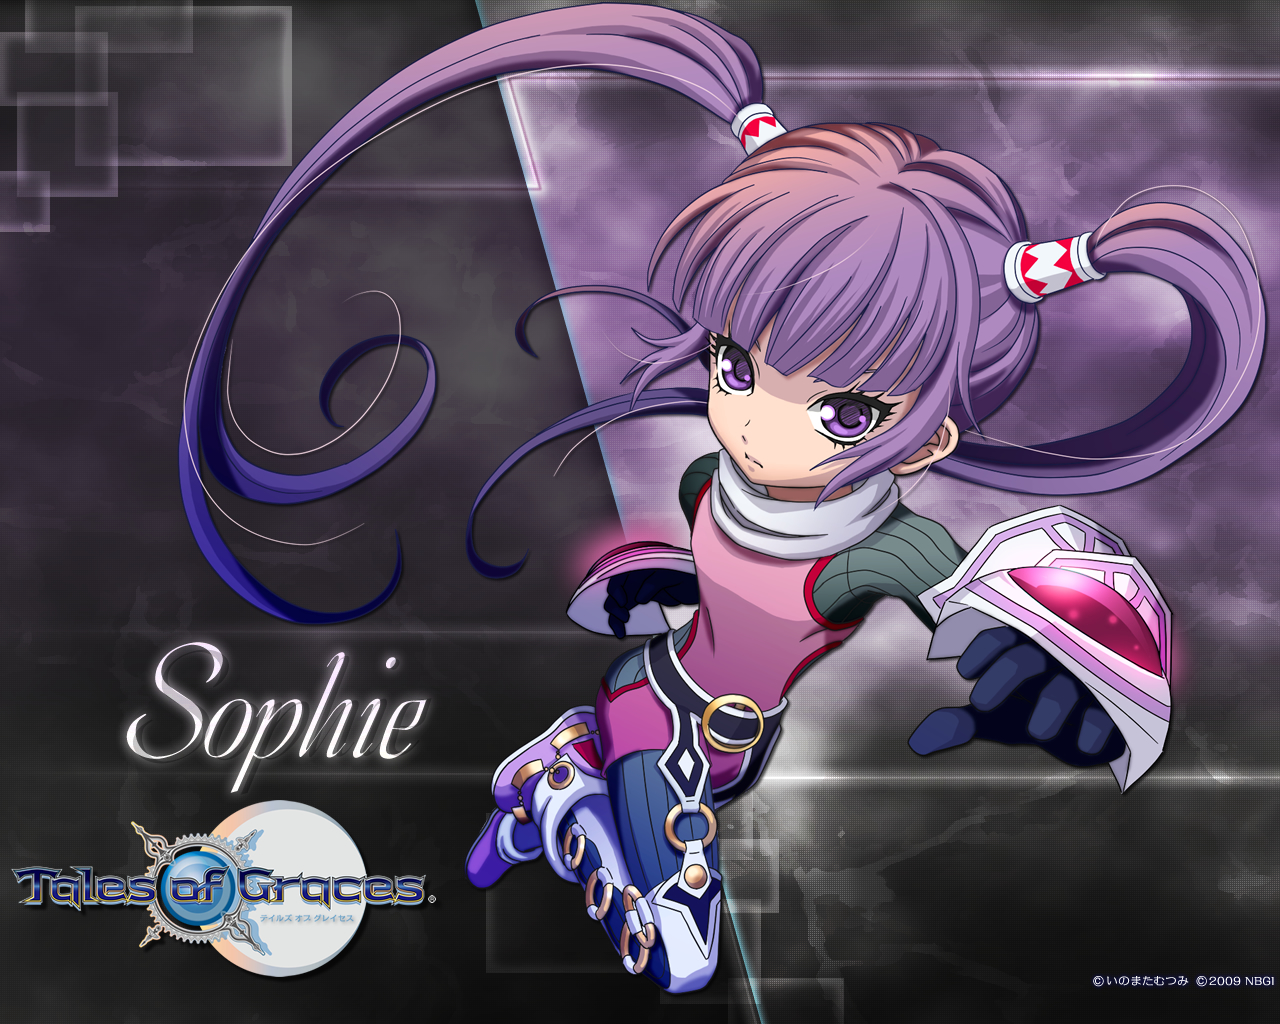 Sophie Official Wall 2 1280x1024
